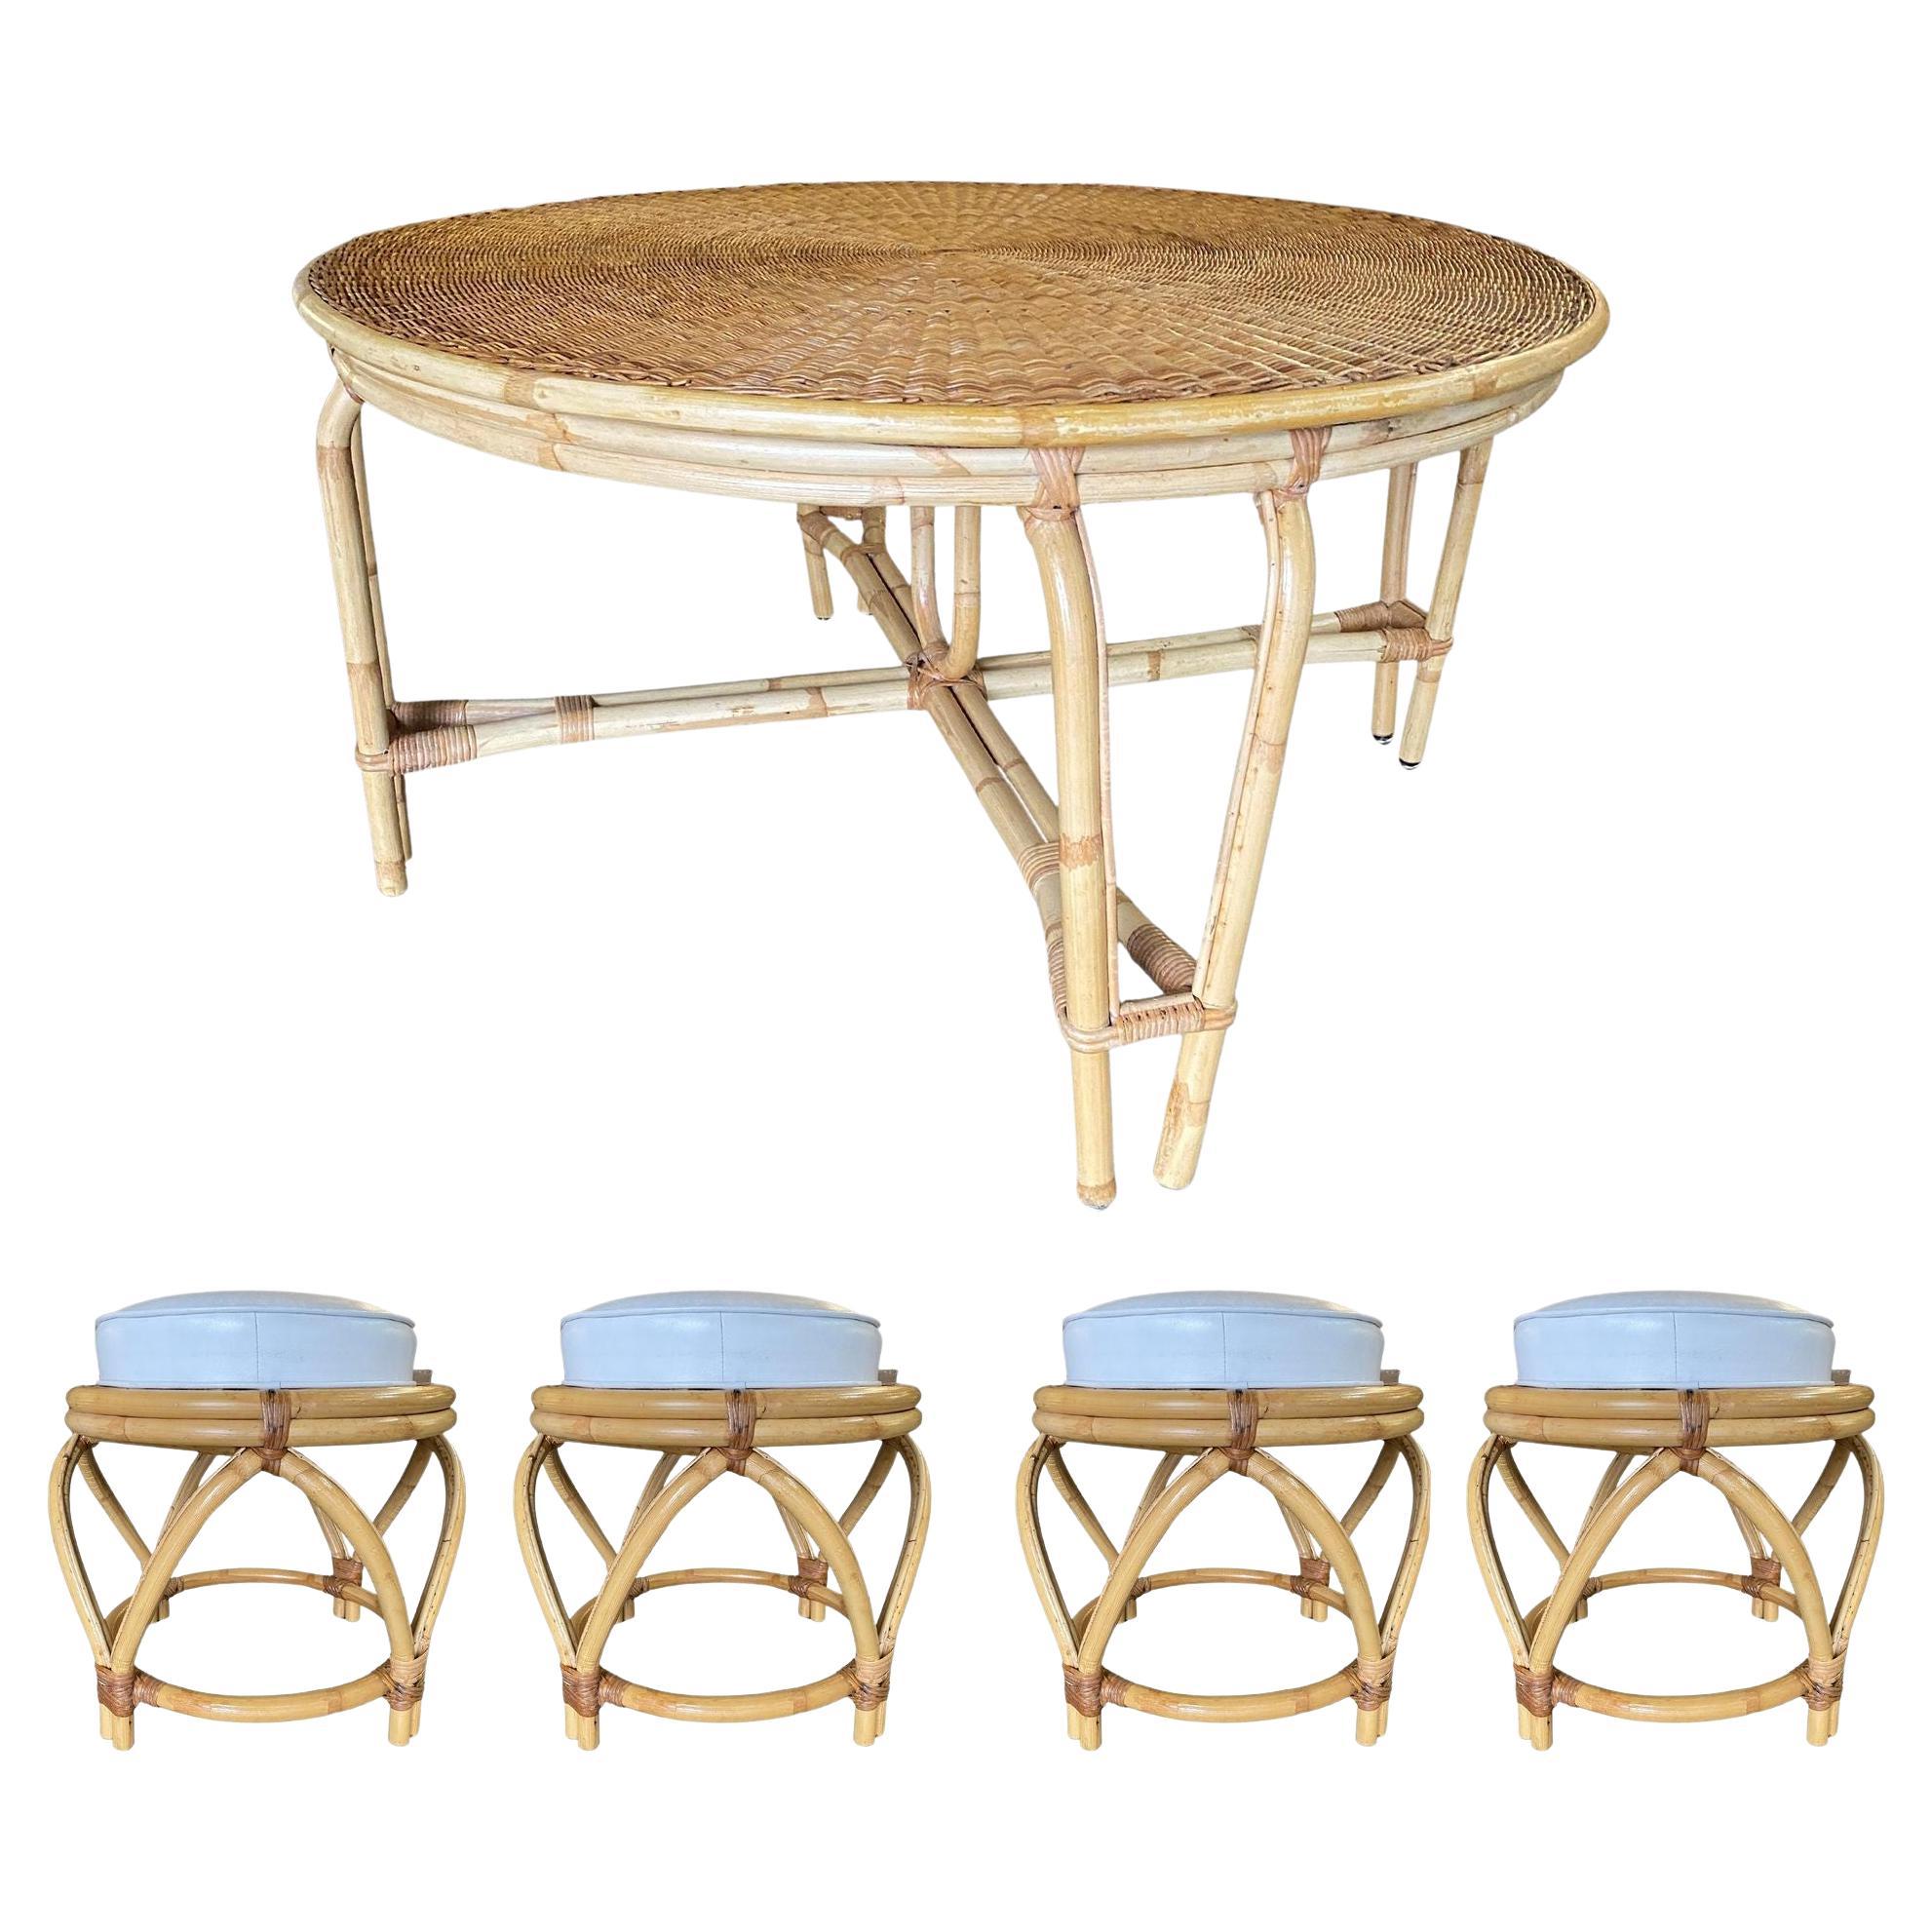 Round Wicker Top Rattan Table with Matching Stools Dining Set